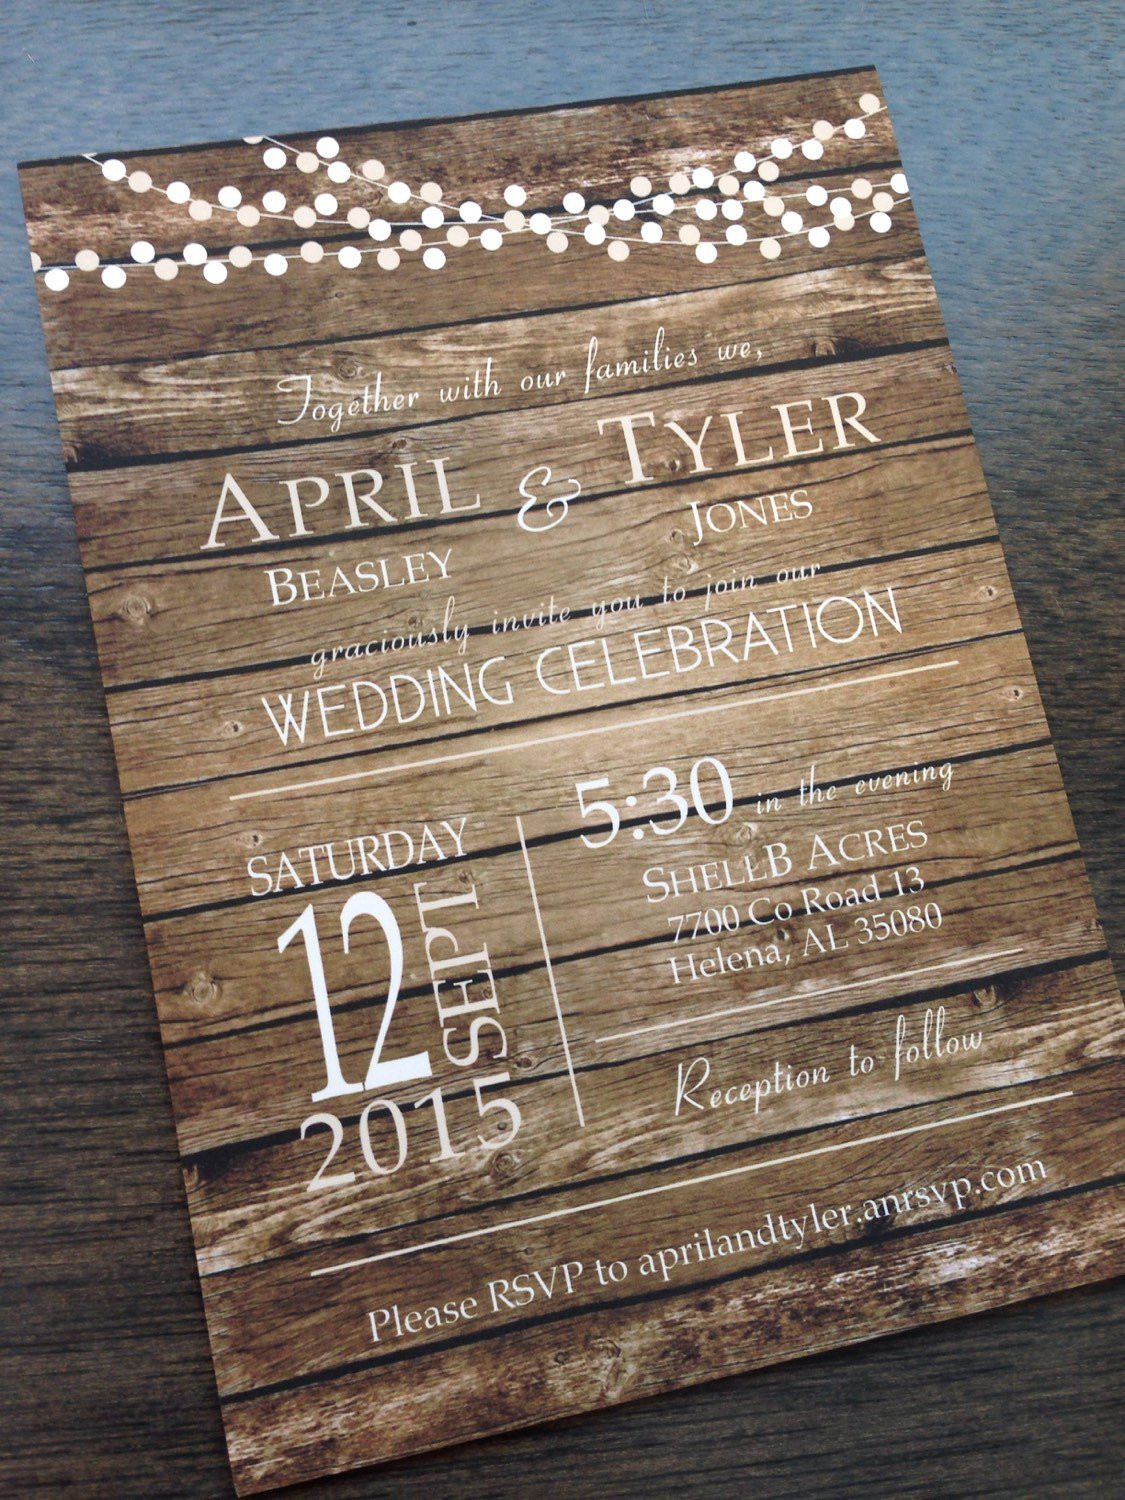 Country Wedding Invitation
 Wedding Party with Rustic Country Wedding Invitations